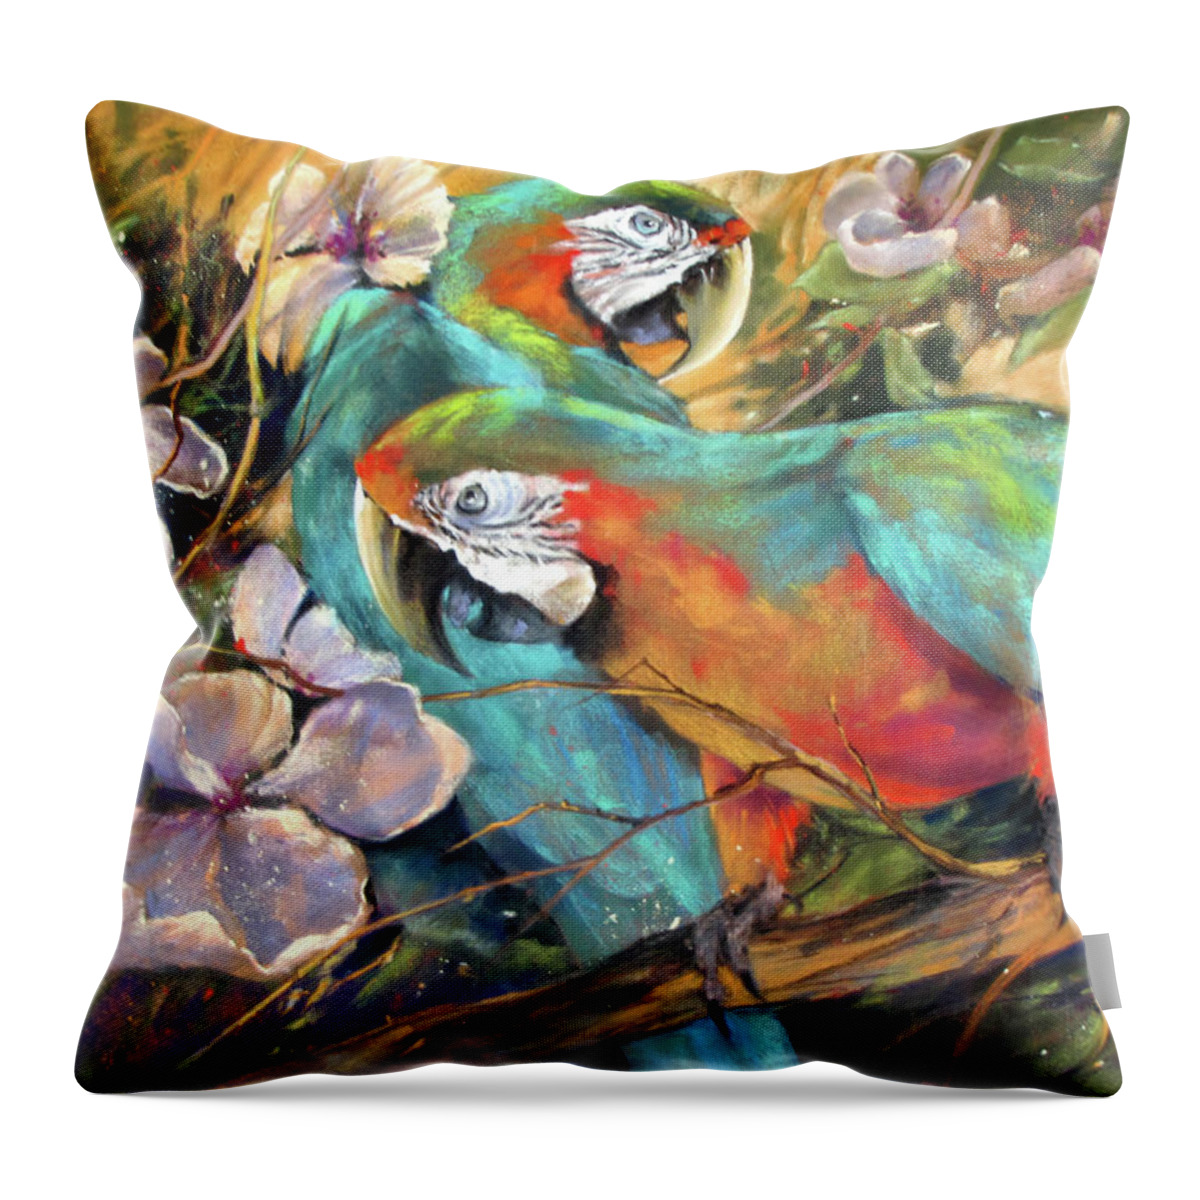 Bird Throw Pillow featuring the painting The Gathering by Rae Andrews